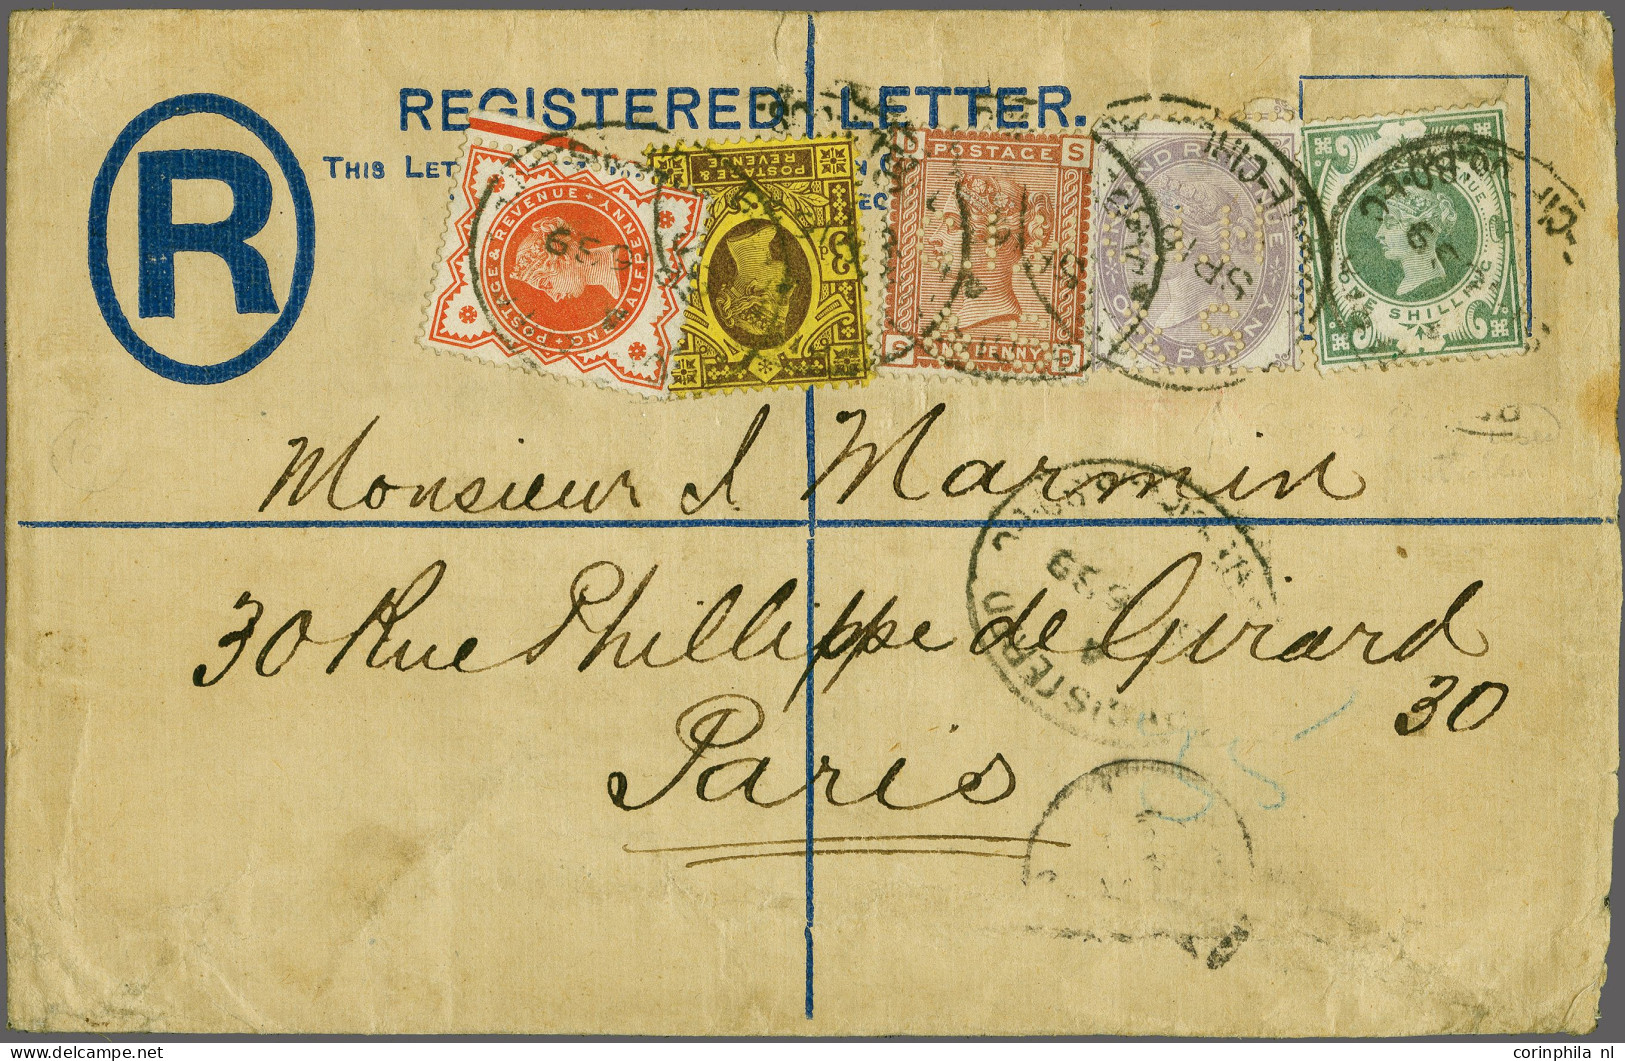 Cover 1881 Postally Used Fiscal On Registered Envelope Sent From London 1889 To Paris France Bearing A 1d. Inland Revenu - Revenue Stamps